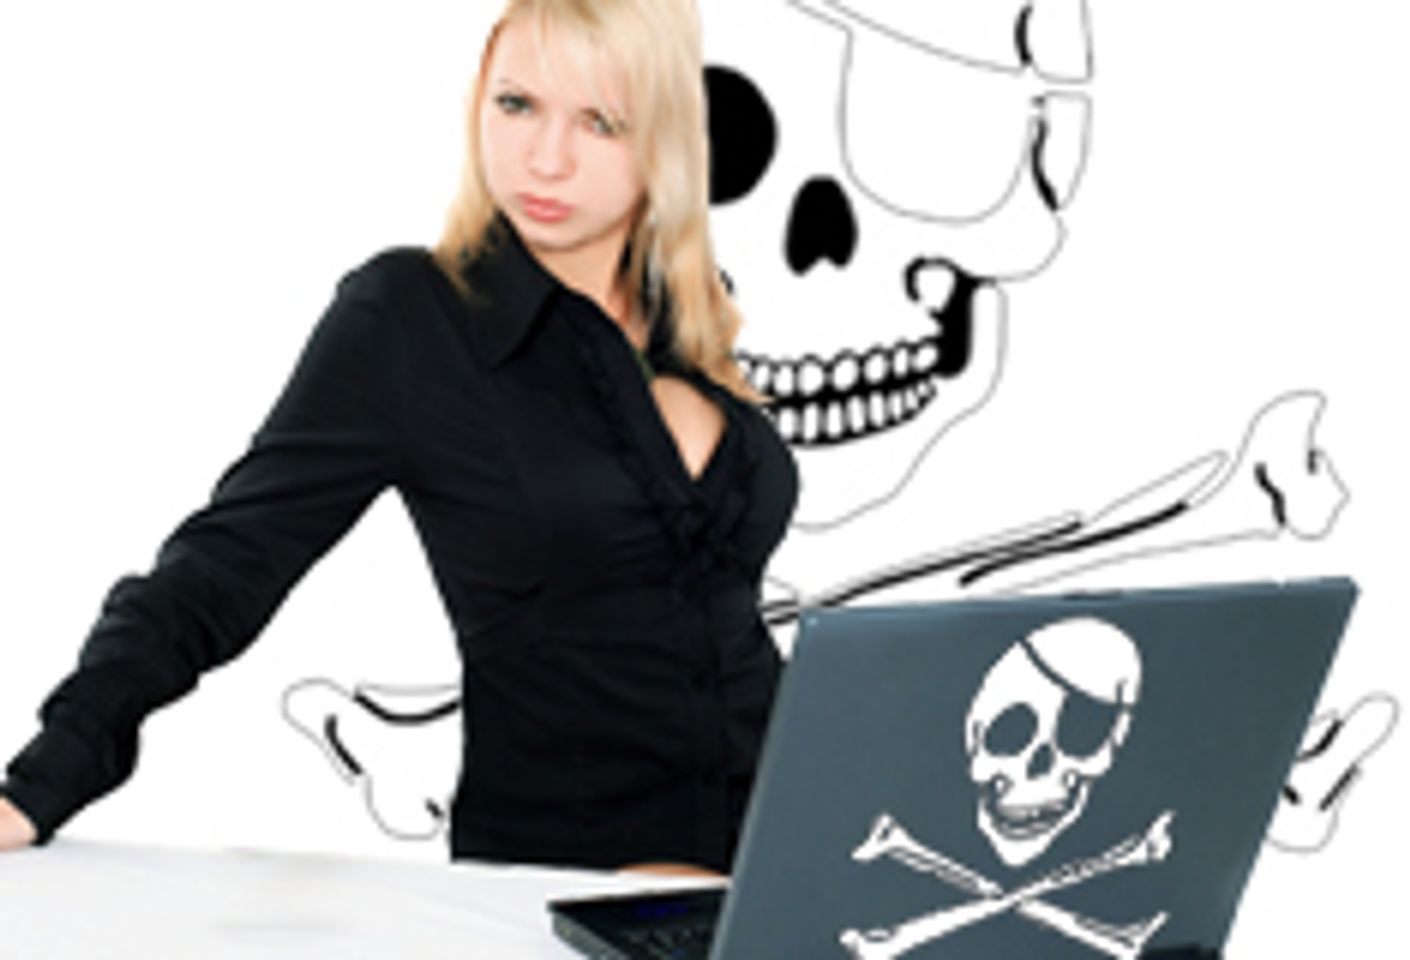 Pirate Bay Pirated by New Streaming Video Site